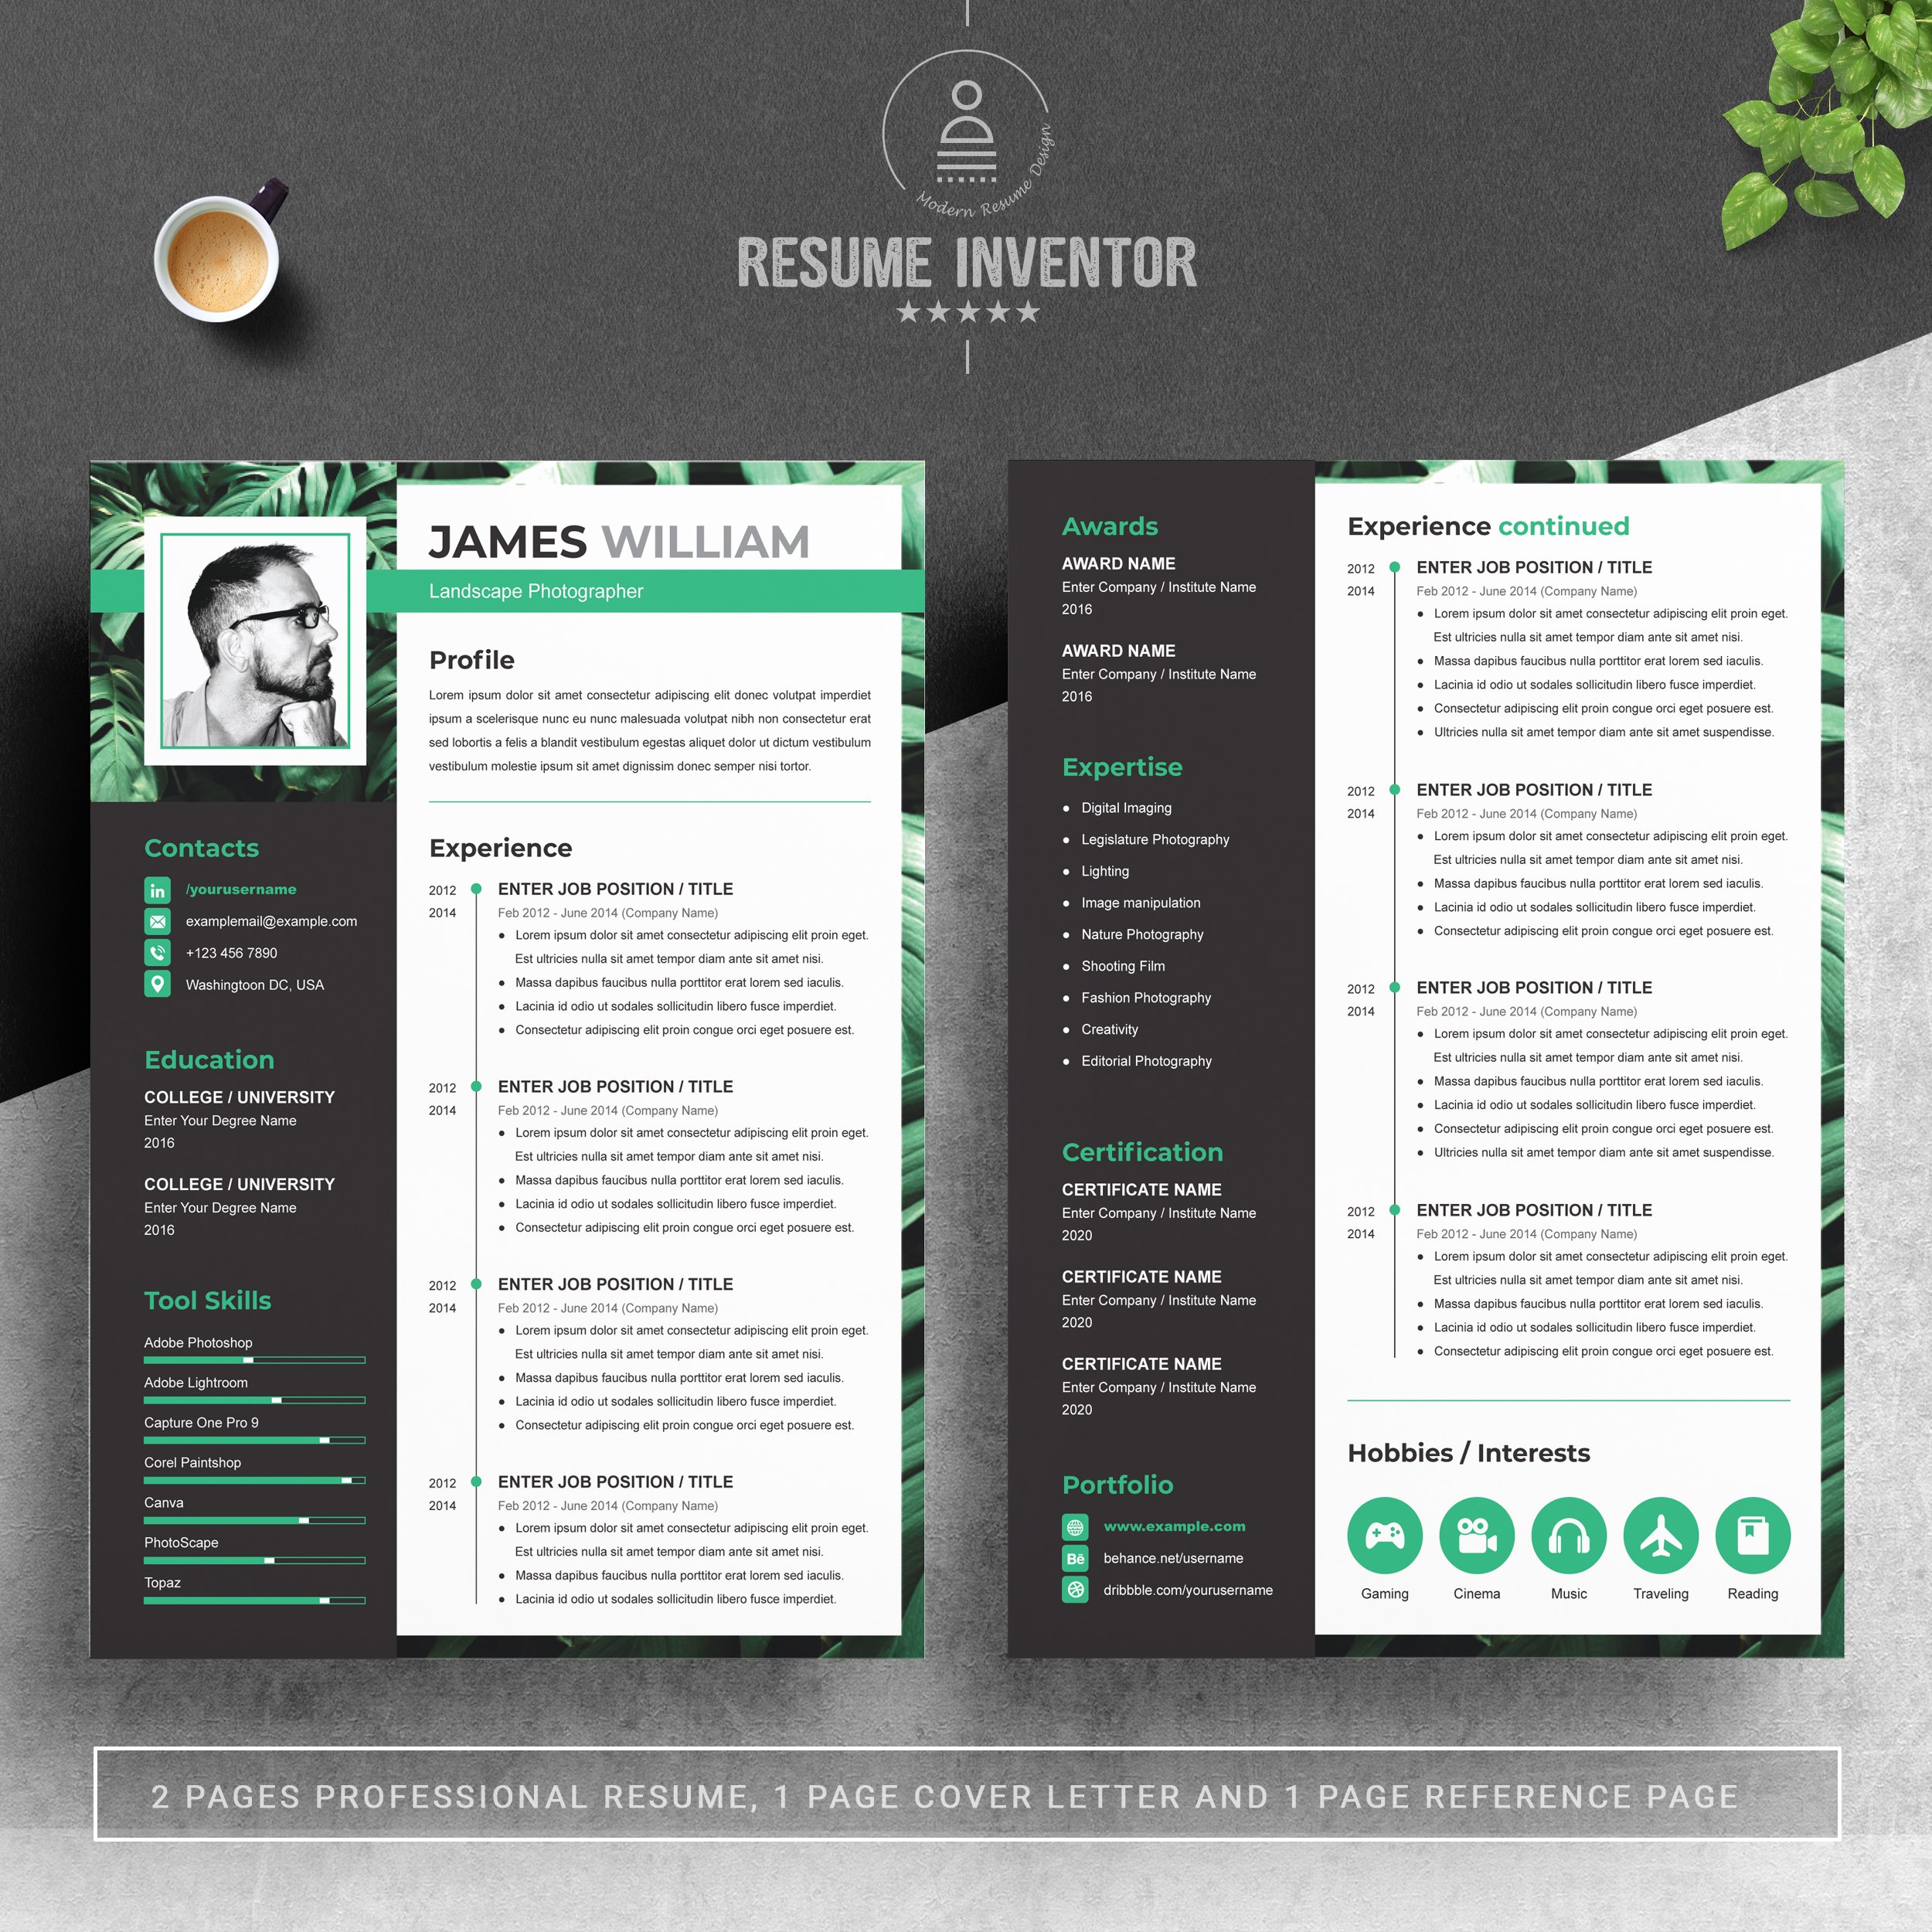 Resume Template for Photographer preview image.